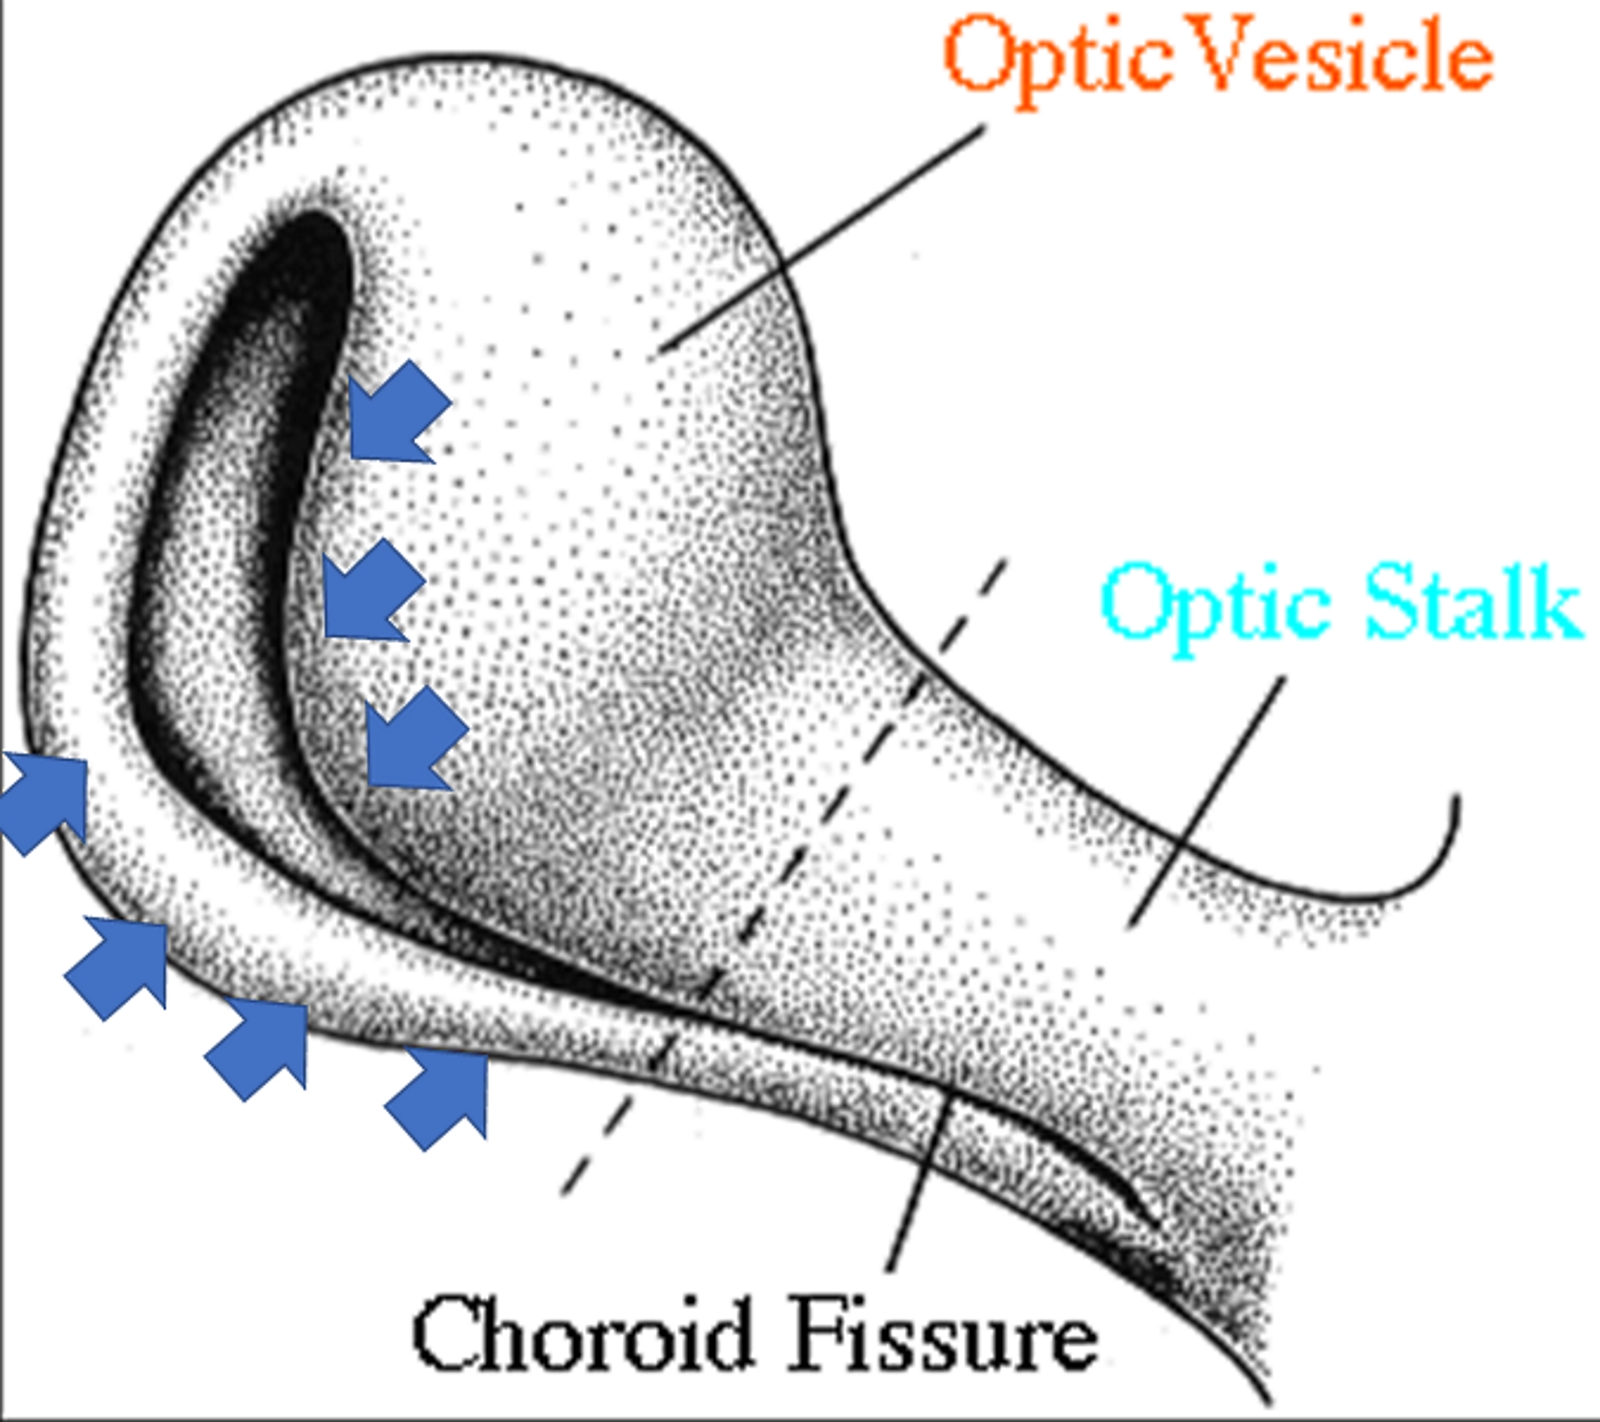 The figure shows the invagination process of the optic stalk and the optic vesicle, with the formation of the choroid fissure (inferiorly). The blue arrows indicate the direction and area of the invagination.